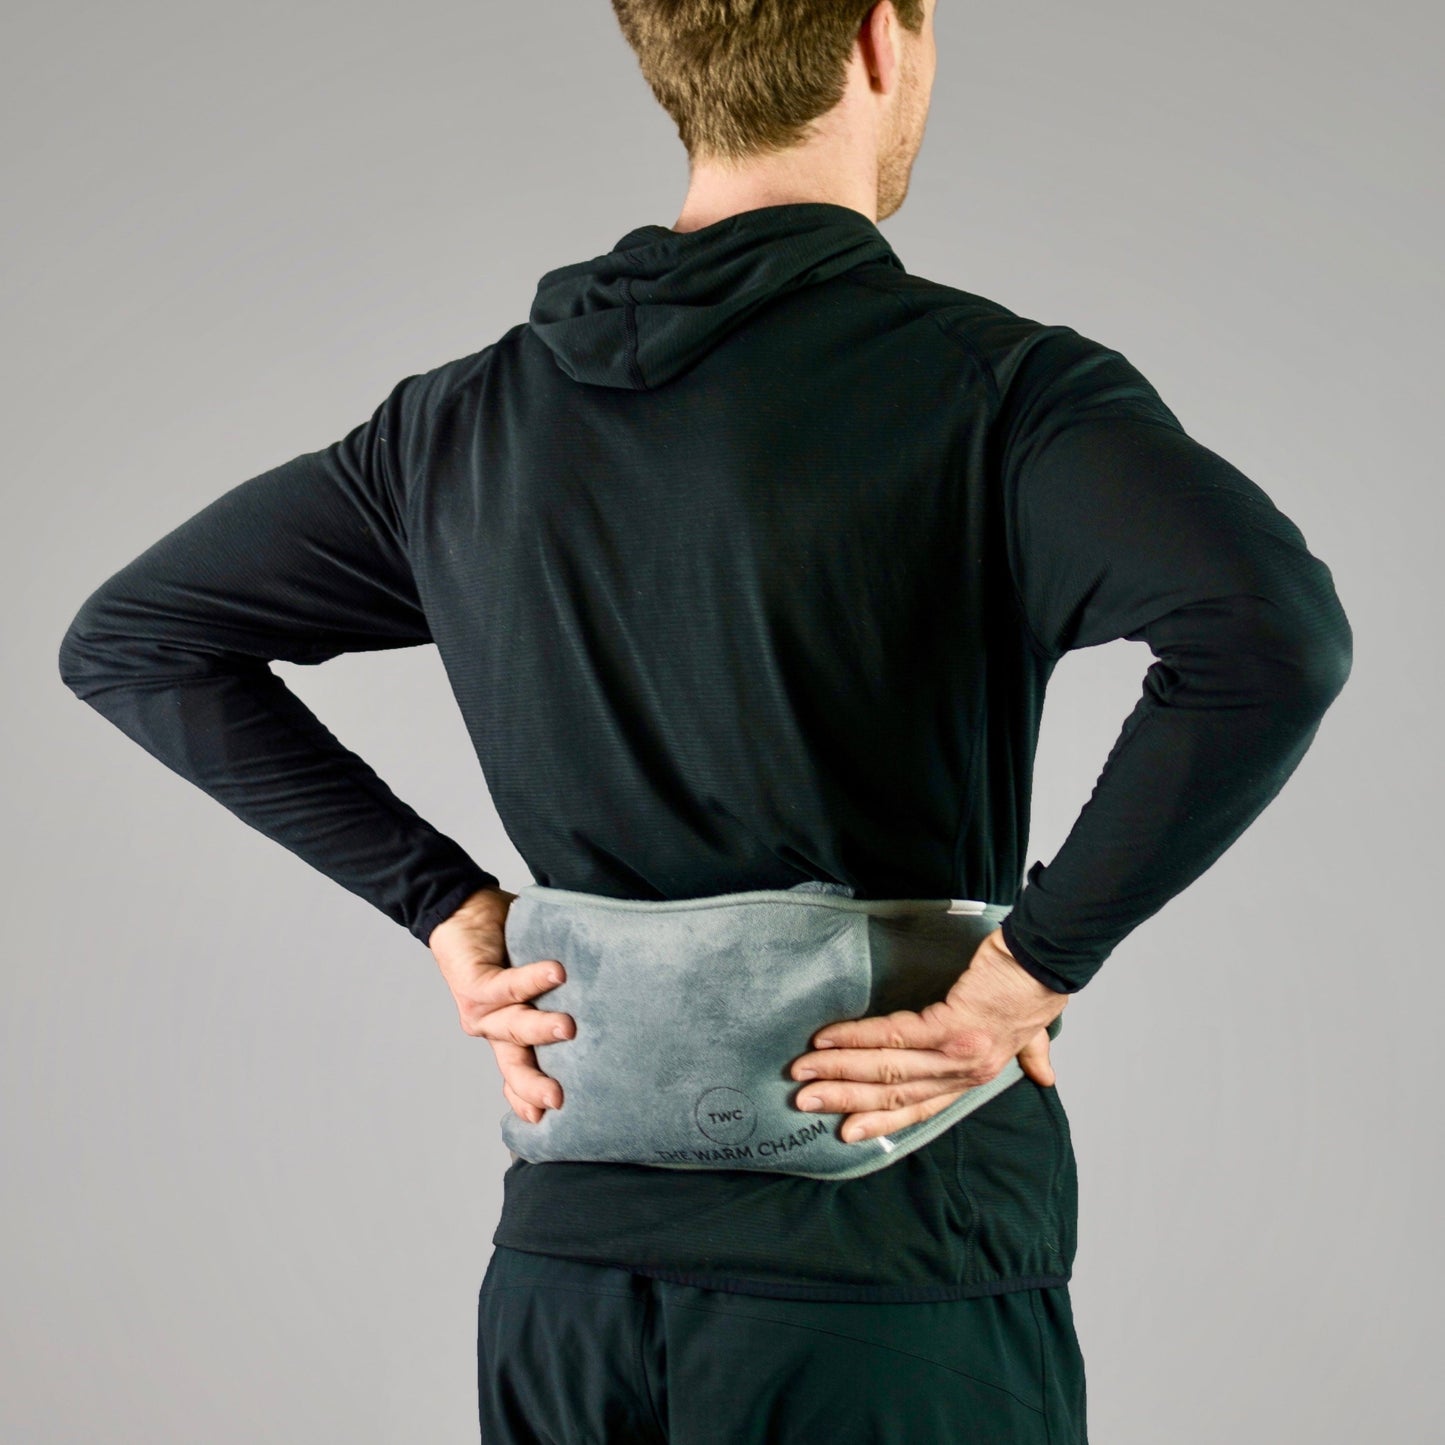 the warm charm's electric heat pack with belt for back pain relief